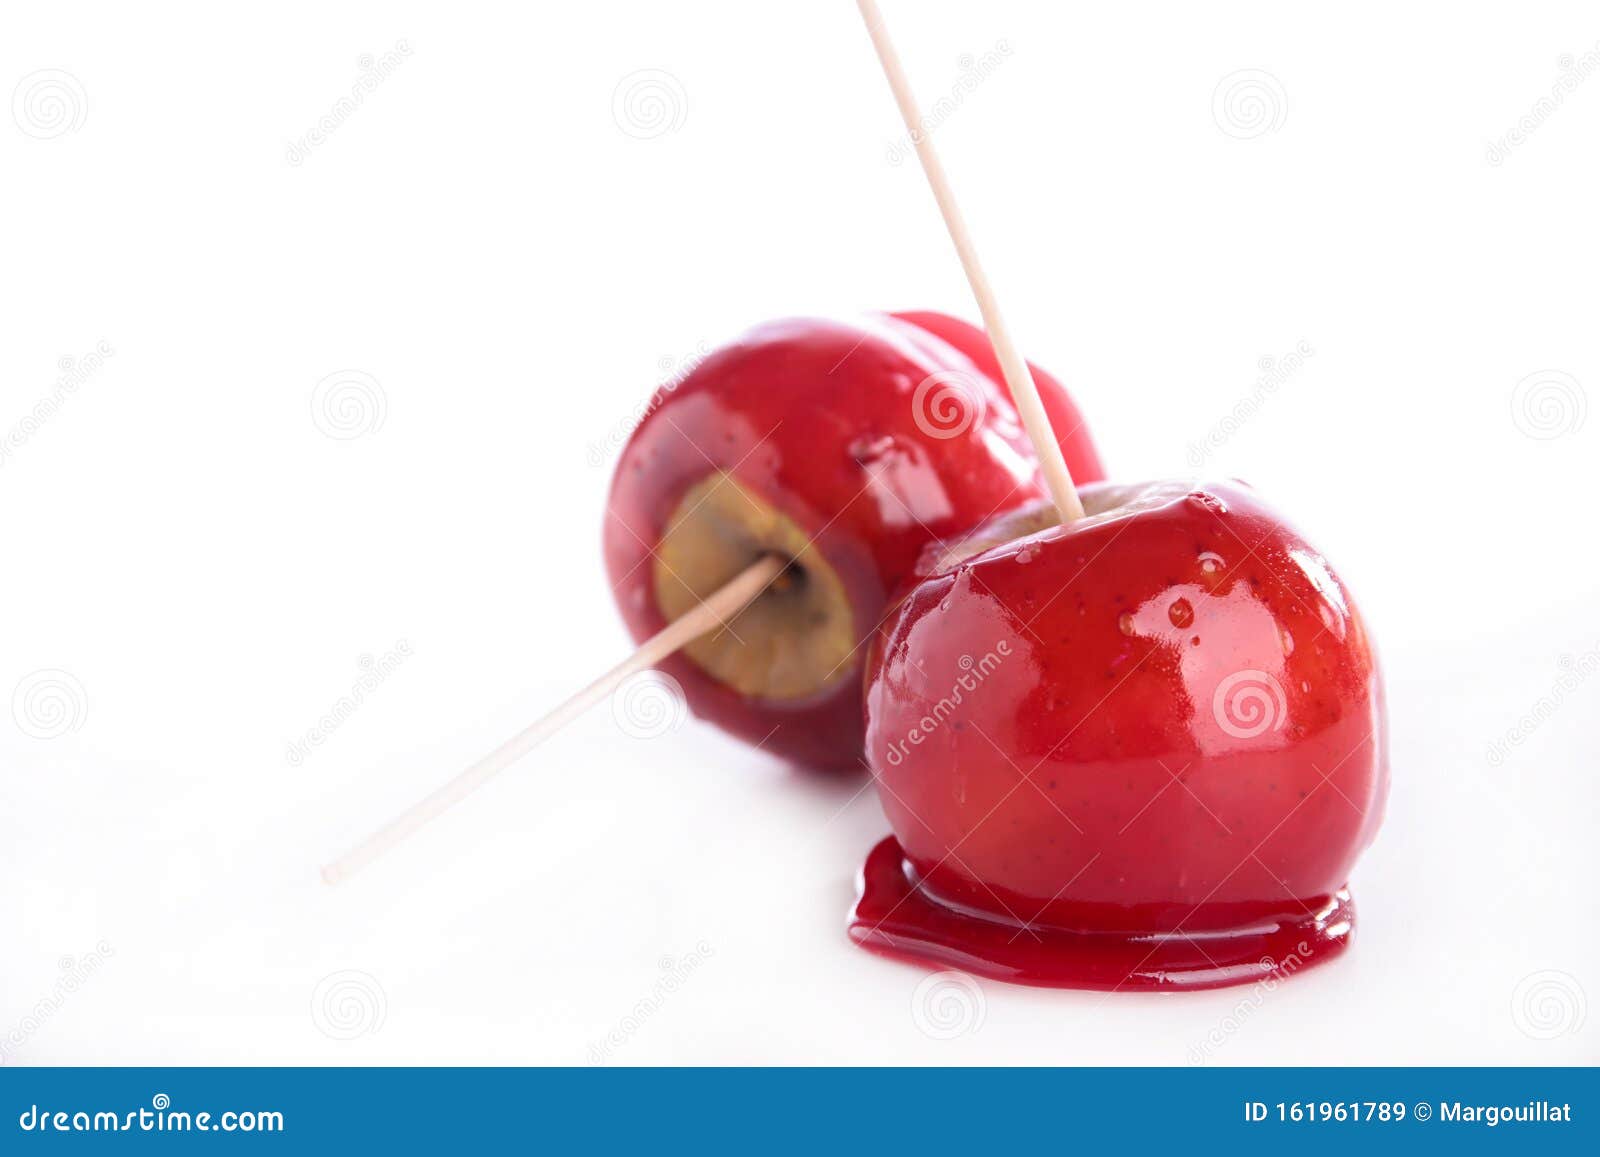 410 Isolated Toffee Apple Photos Free Royalty Free Stock Photos From Dreamstime